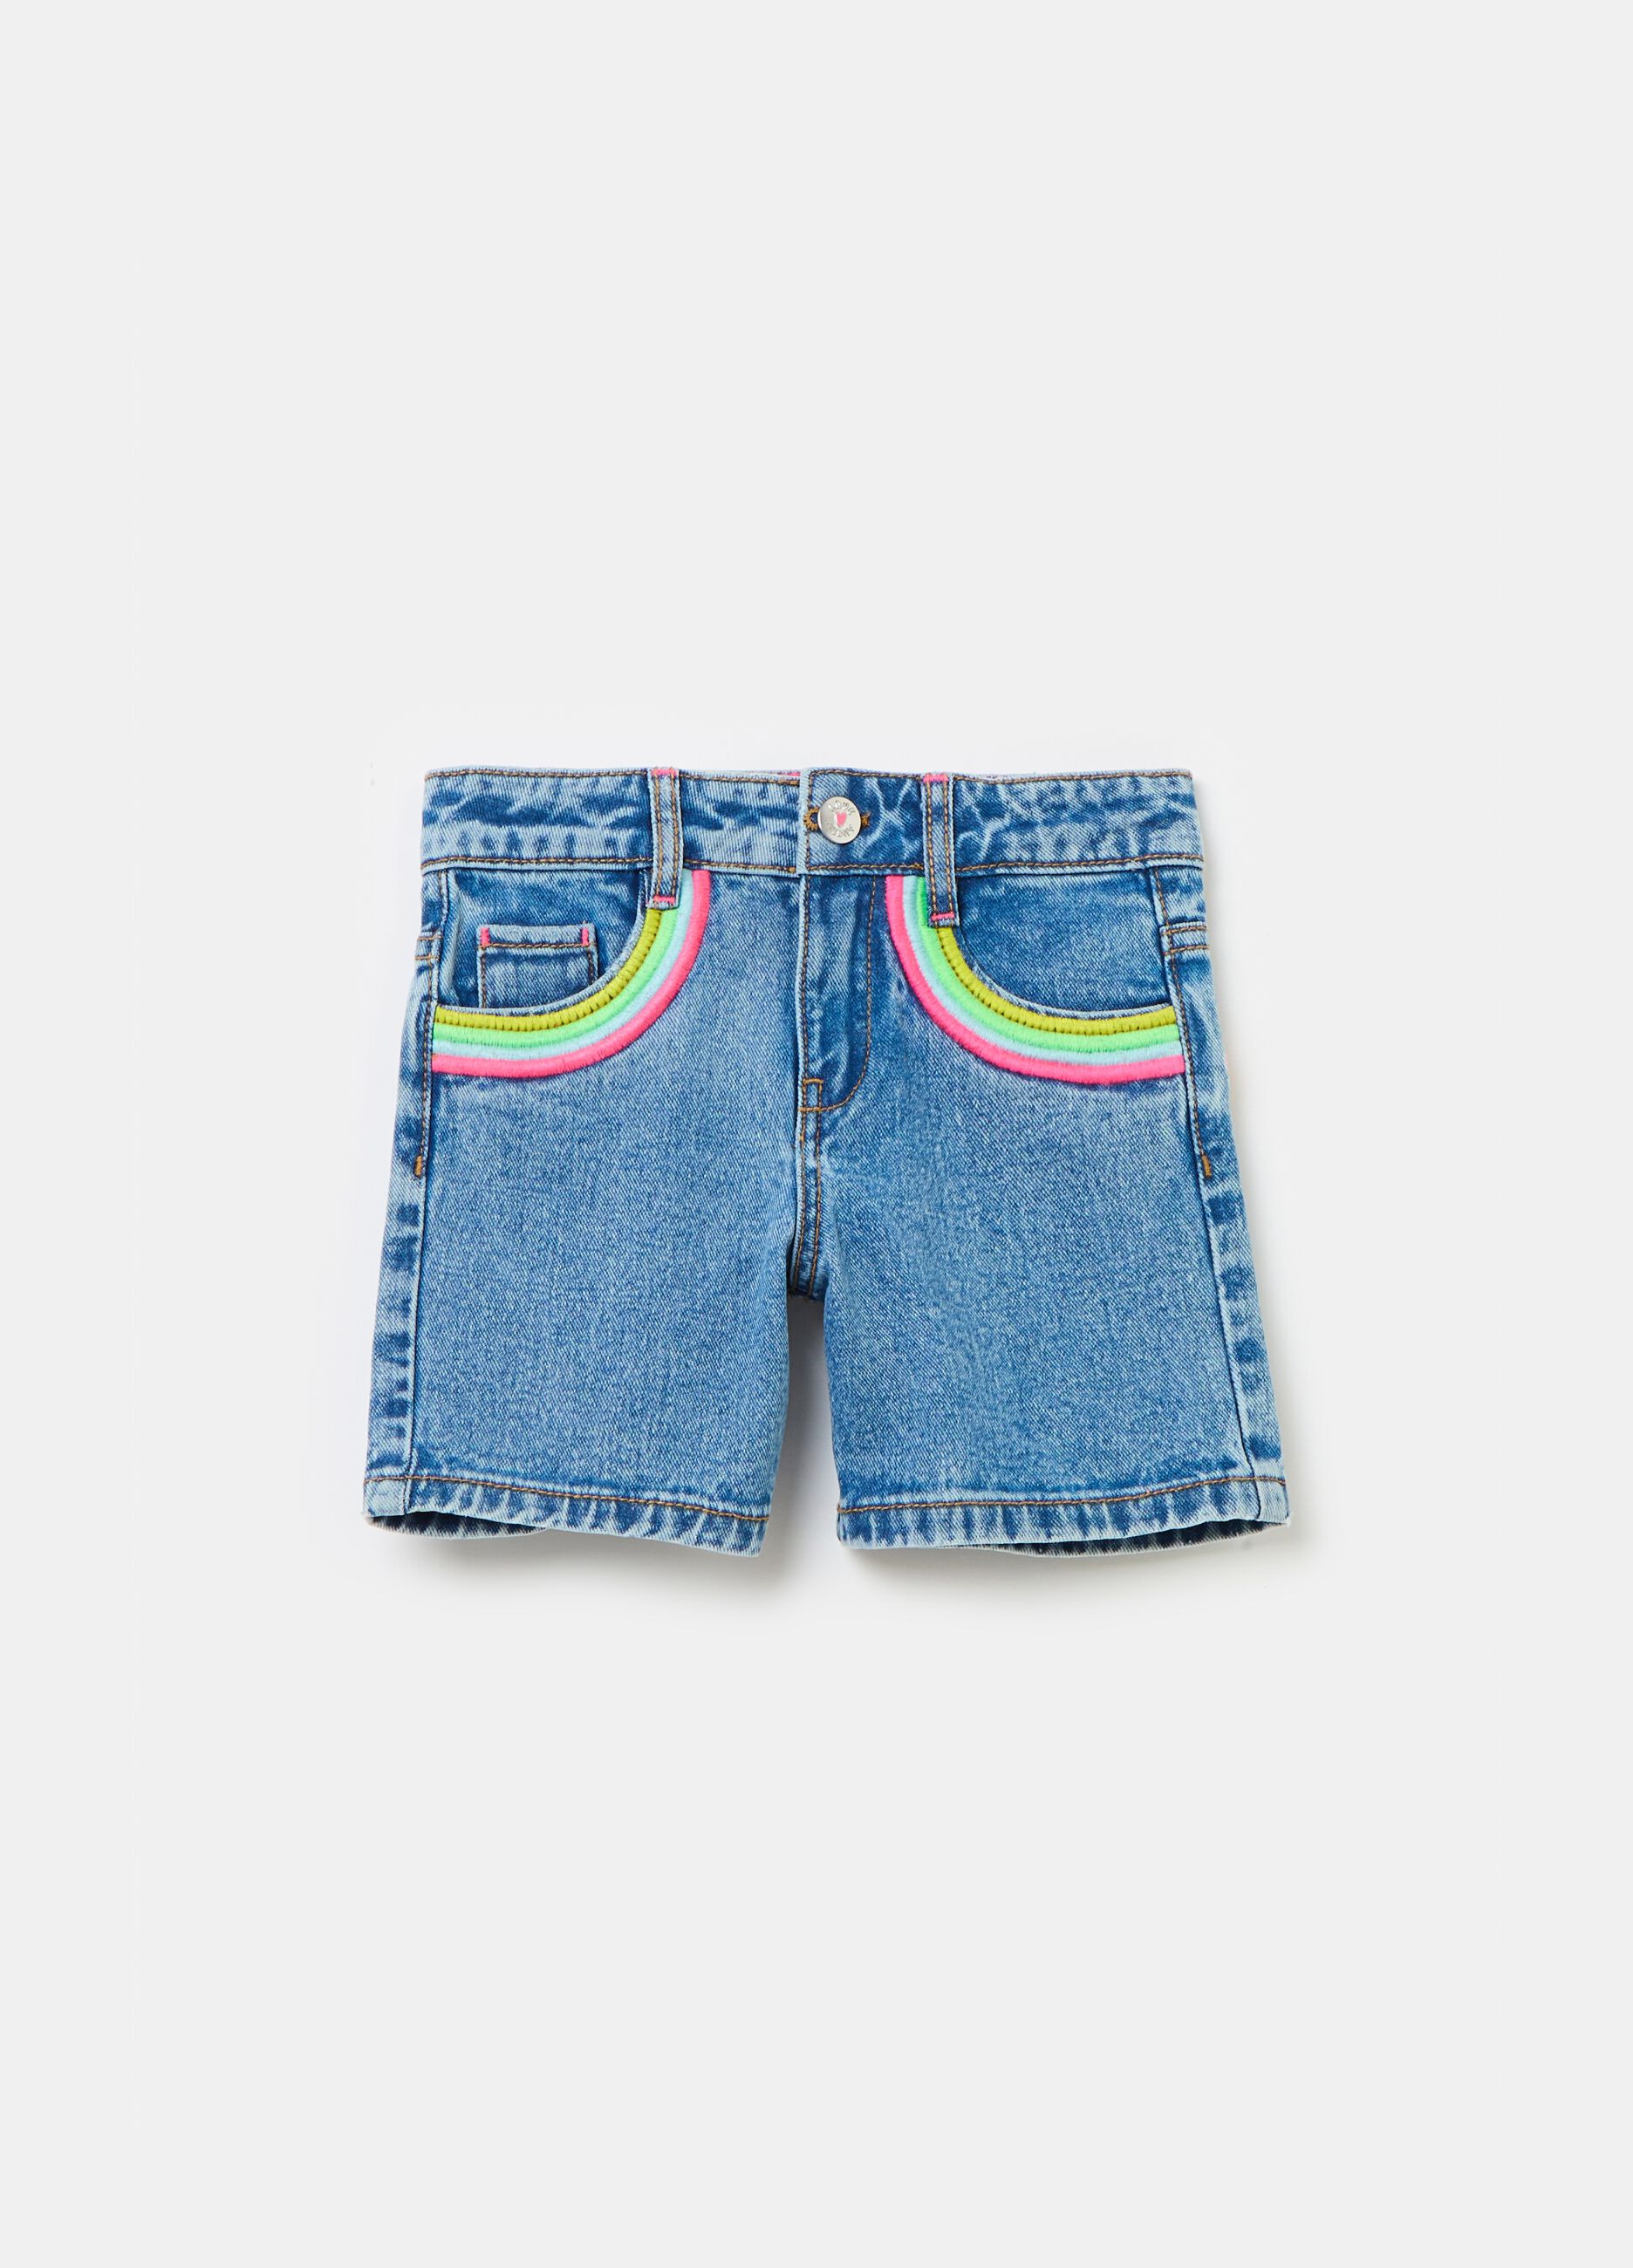 Denim shorts with five pockets and embroidery